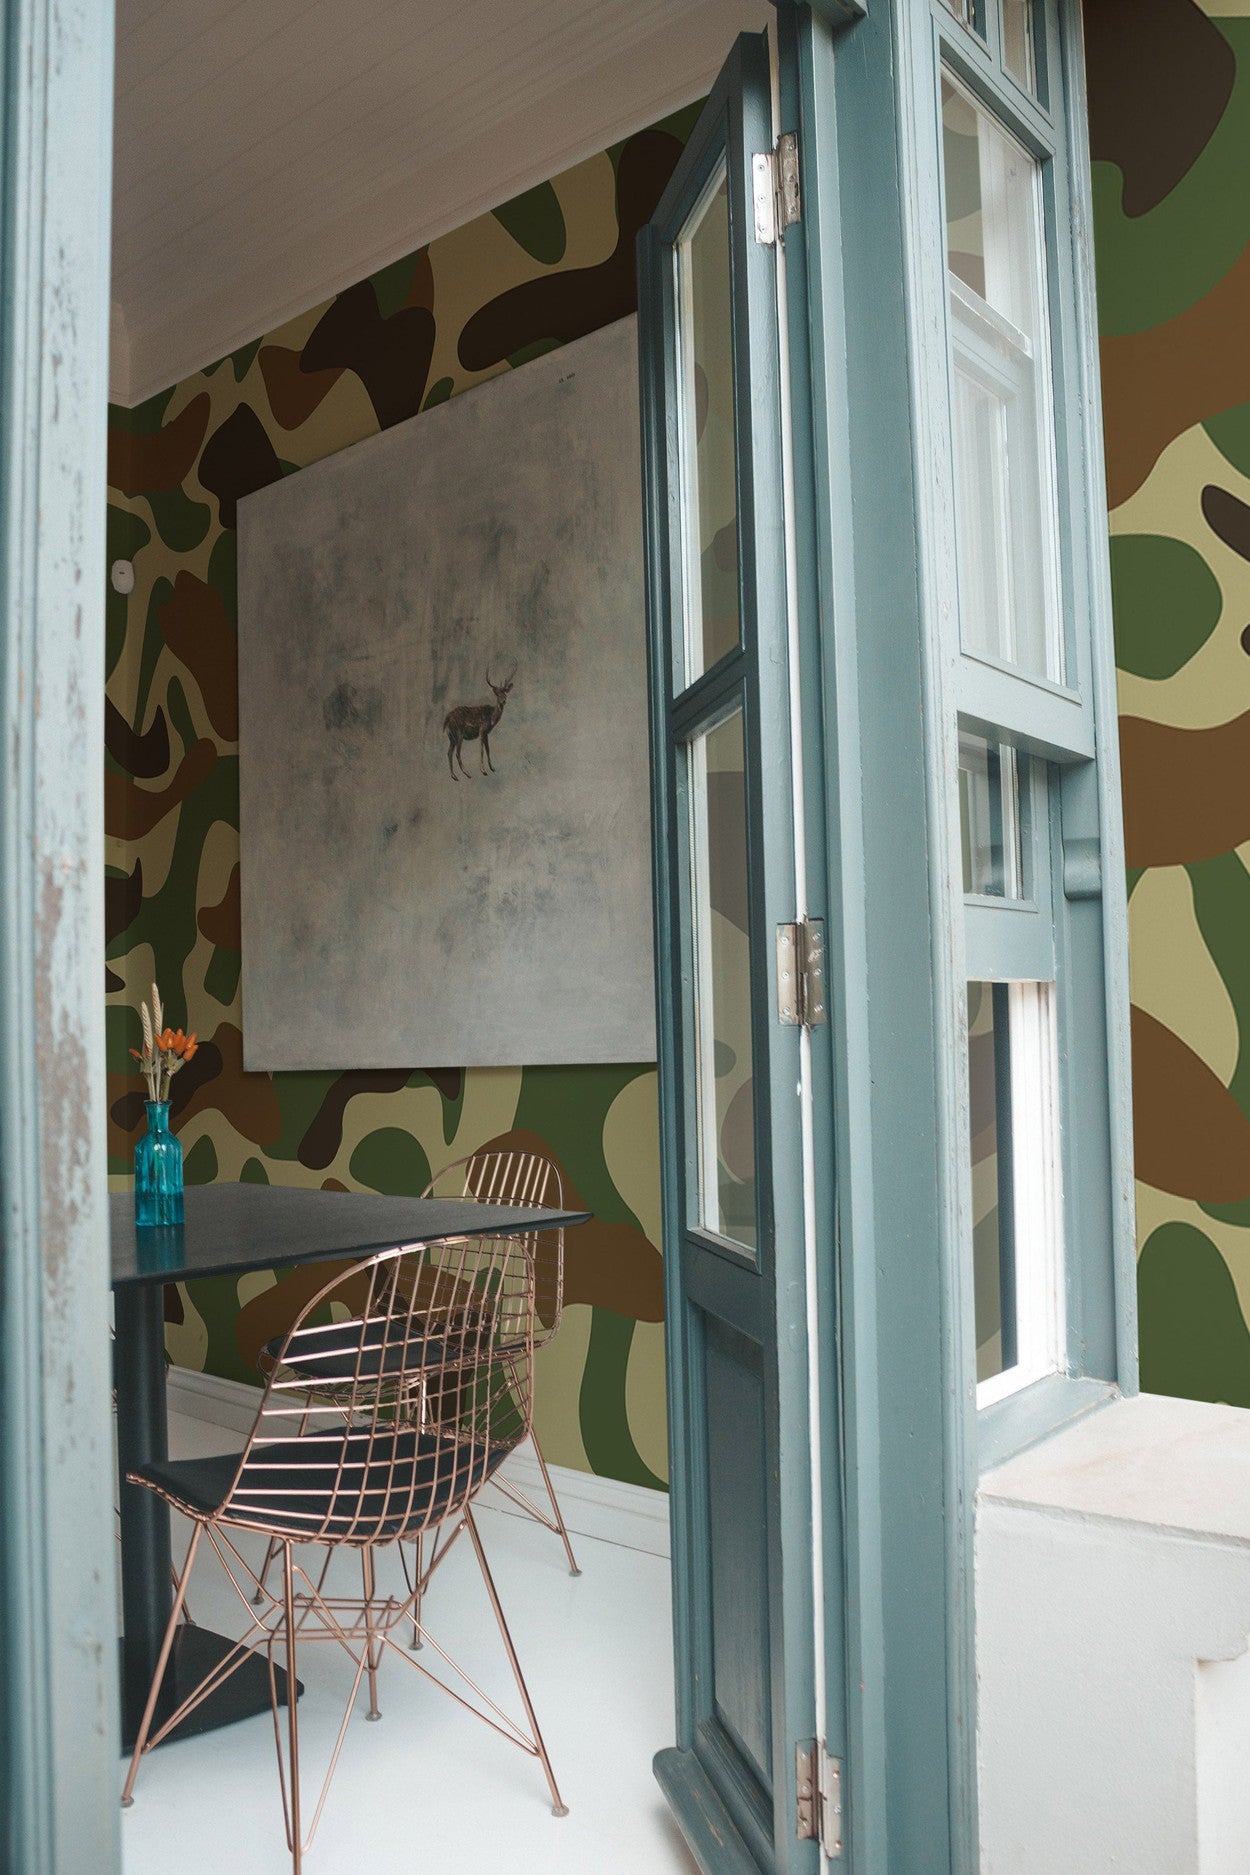 Interior view of a room with a large camouflage pattern wall mural, abstract art on the wall, and modern furniture.